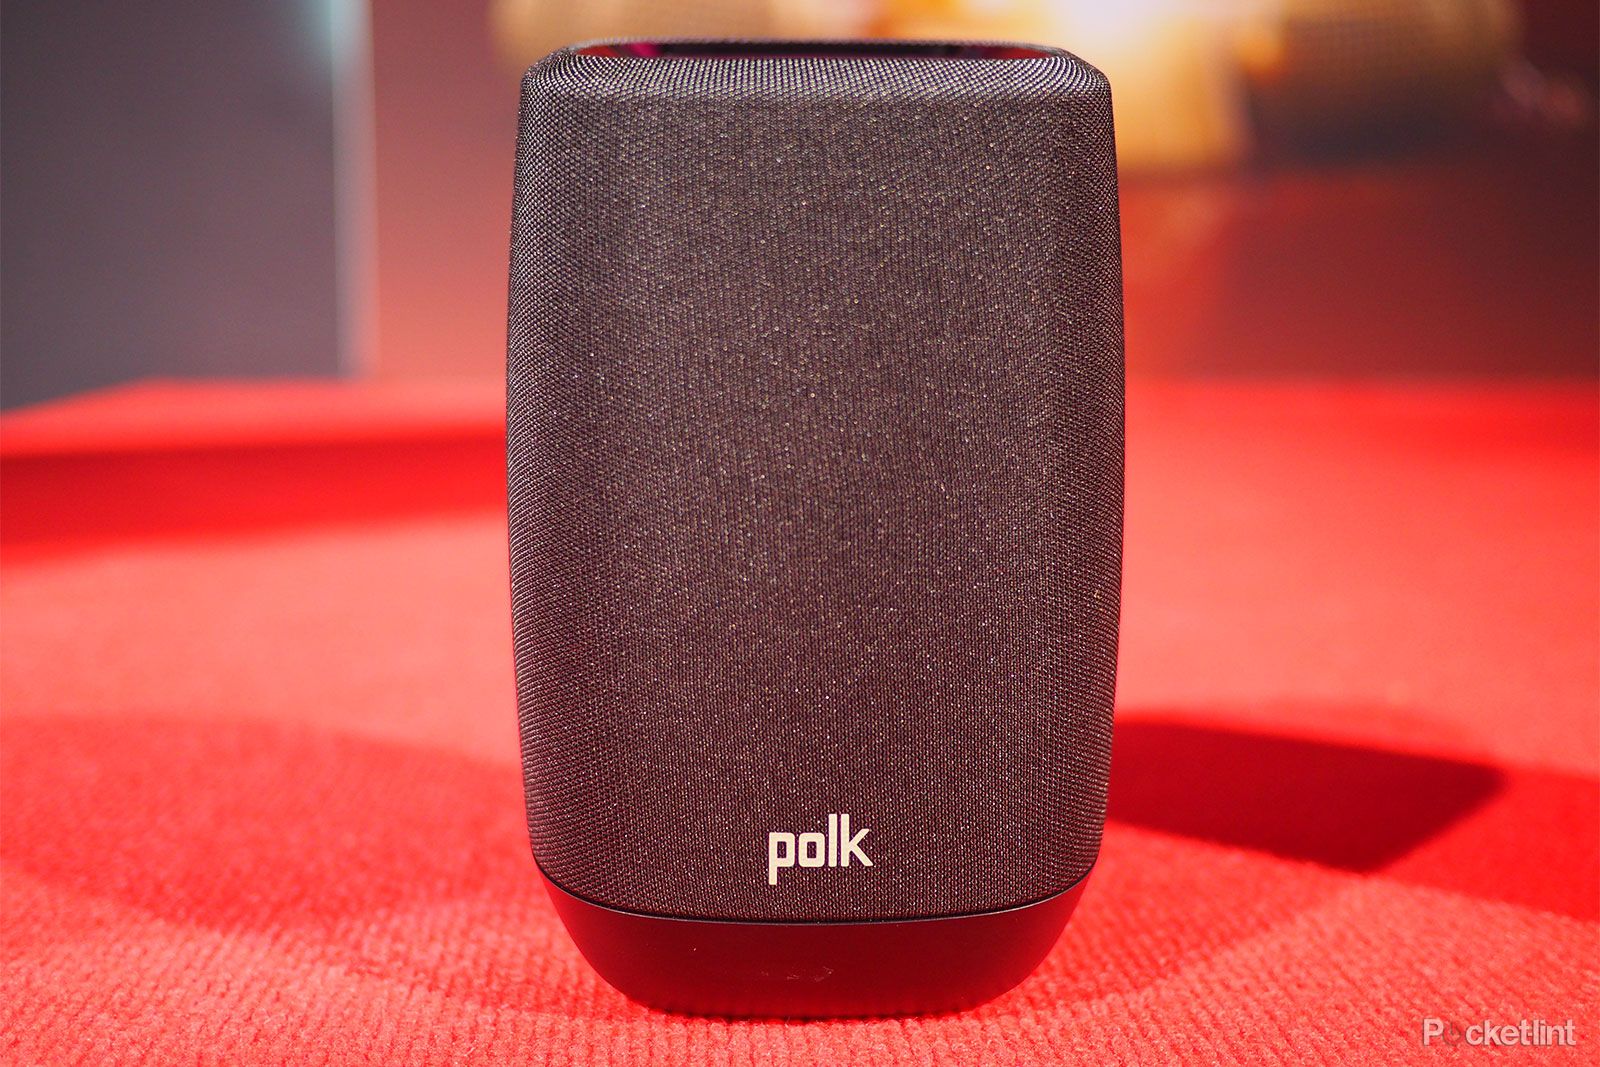 Polk Assist Preview Google Home with better sound image 1